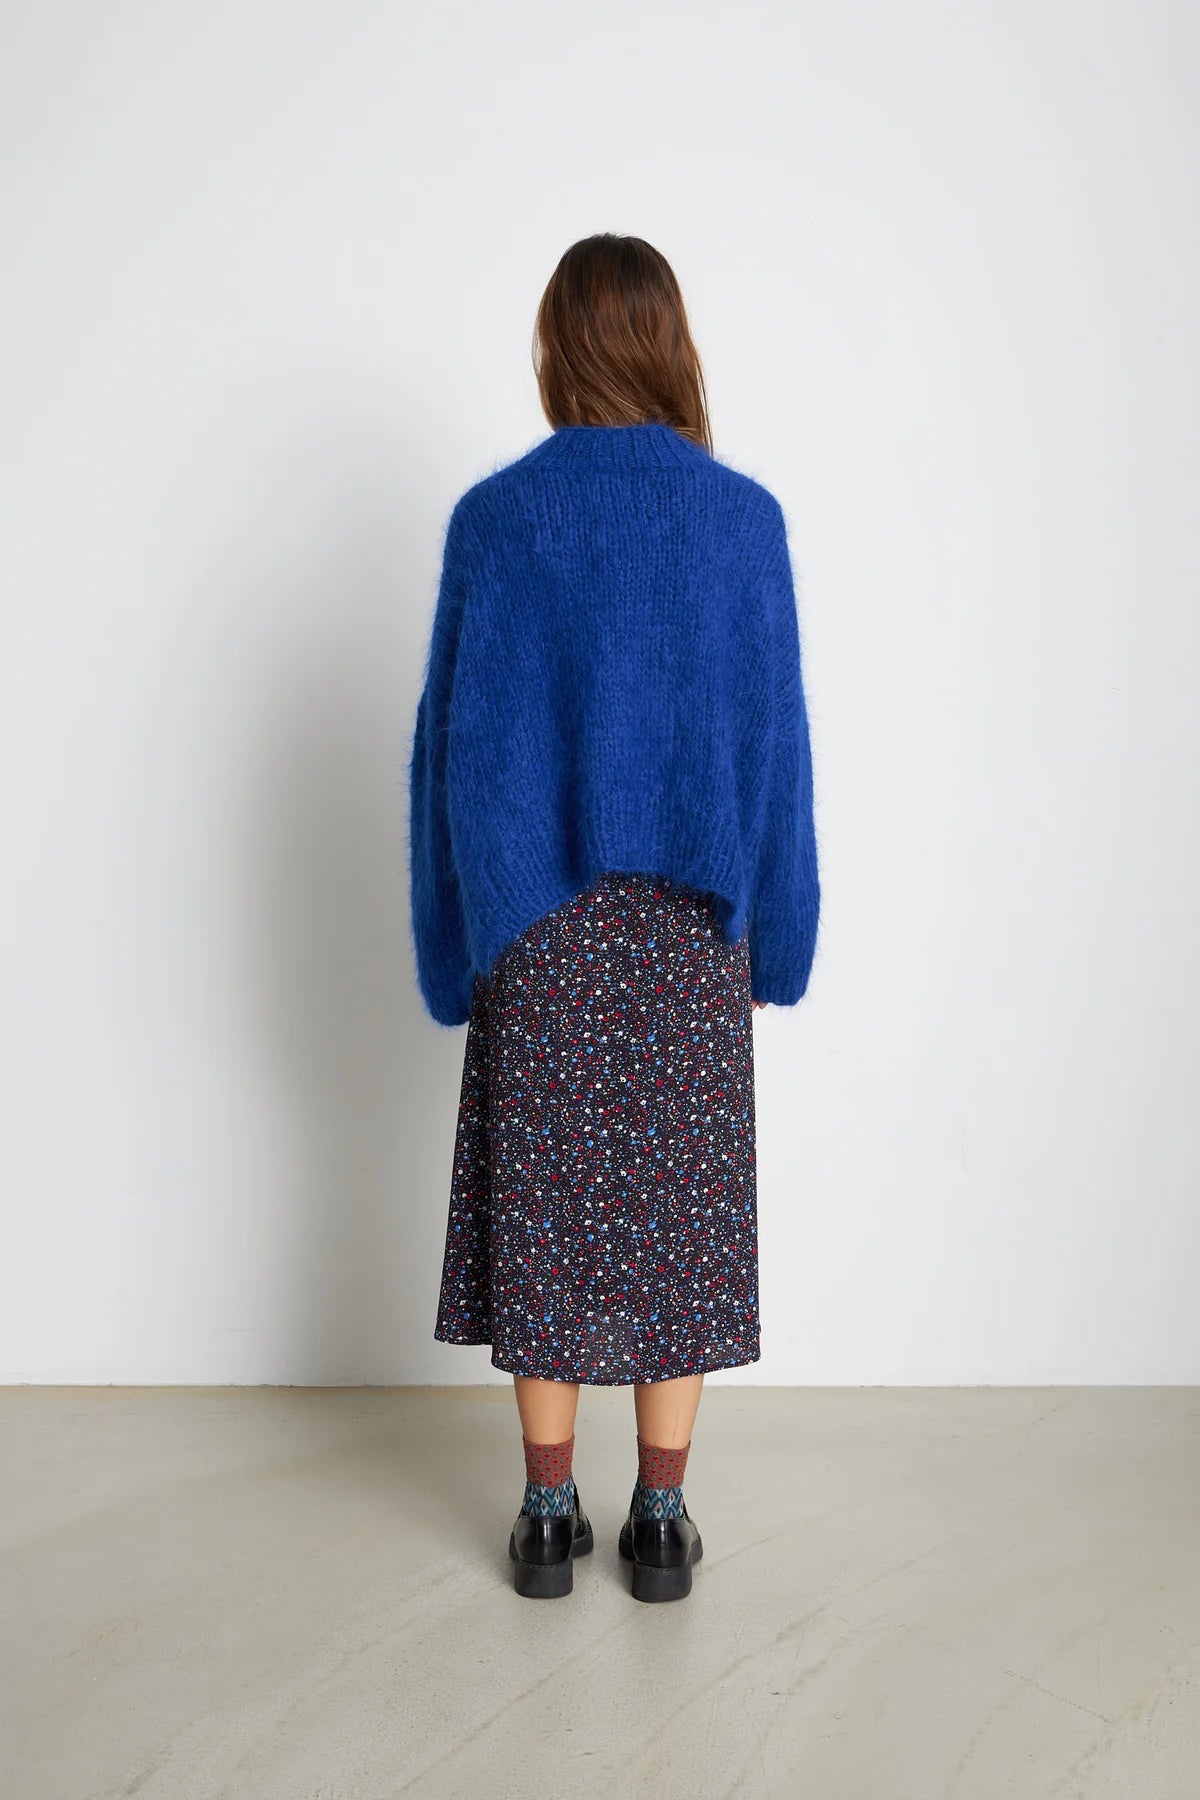 HANDCRAFTED SWEATER - HAPPY BLUE